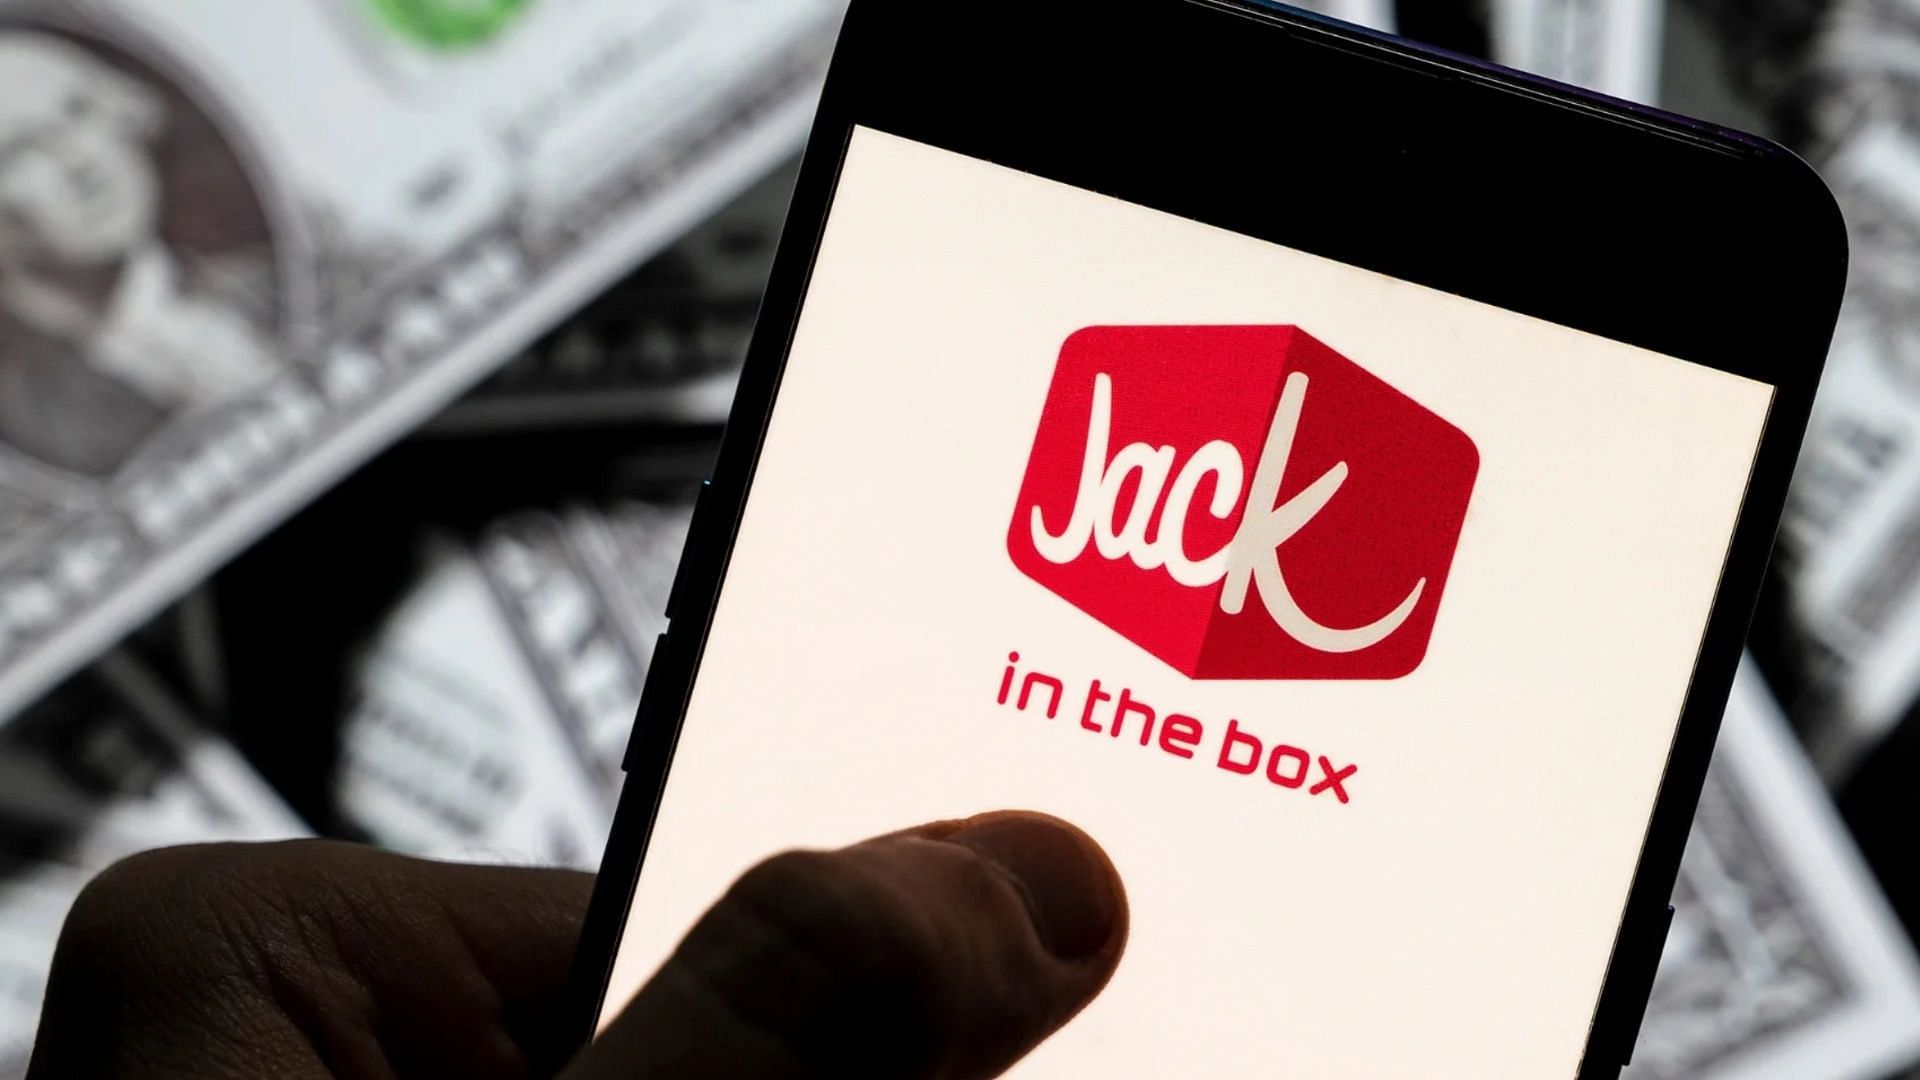 Jack in the Box to offer two free tacos to customers every Tuesday (Image via SOPA Images / Getty Images)